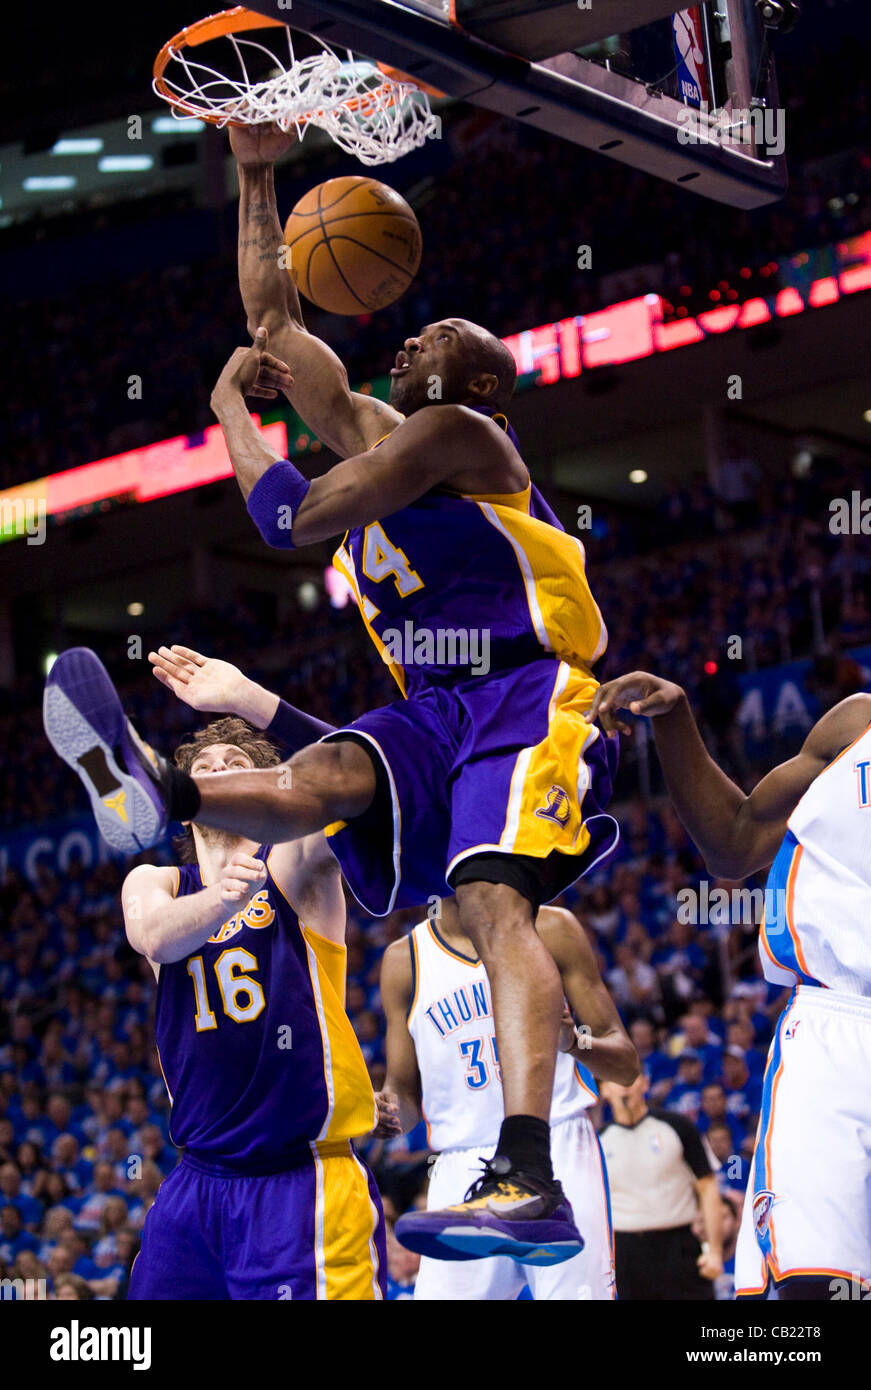 Kobe Bryant of the Los Angeles Lakers goes for a reverse slam dunk